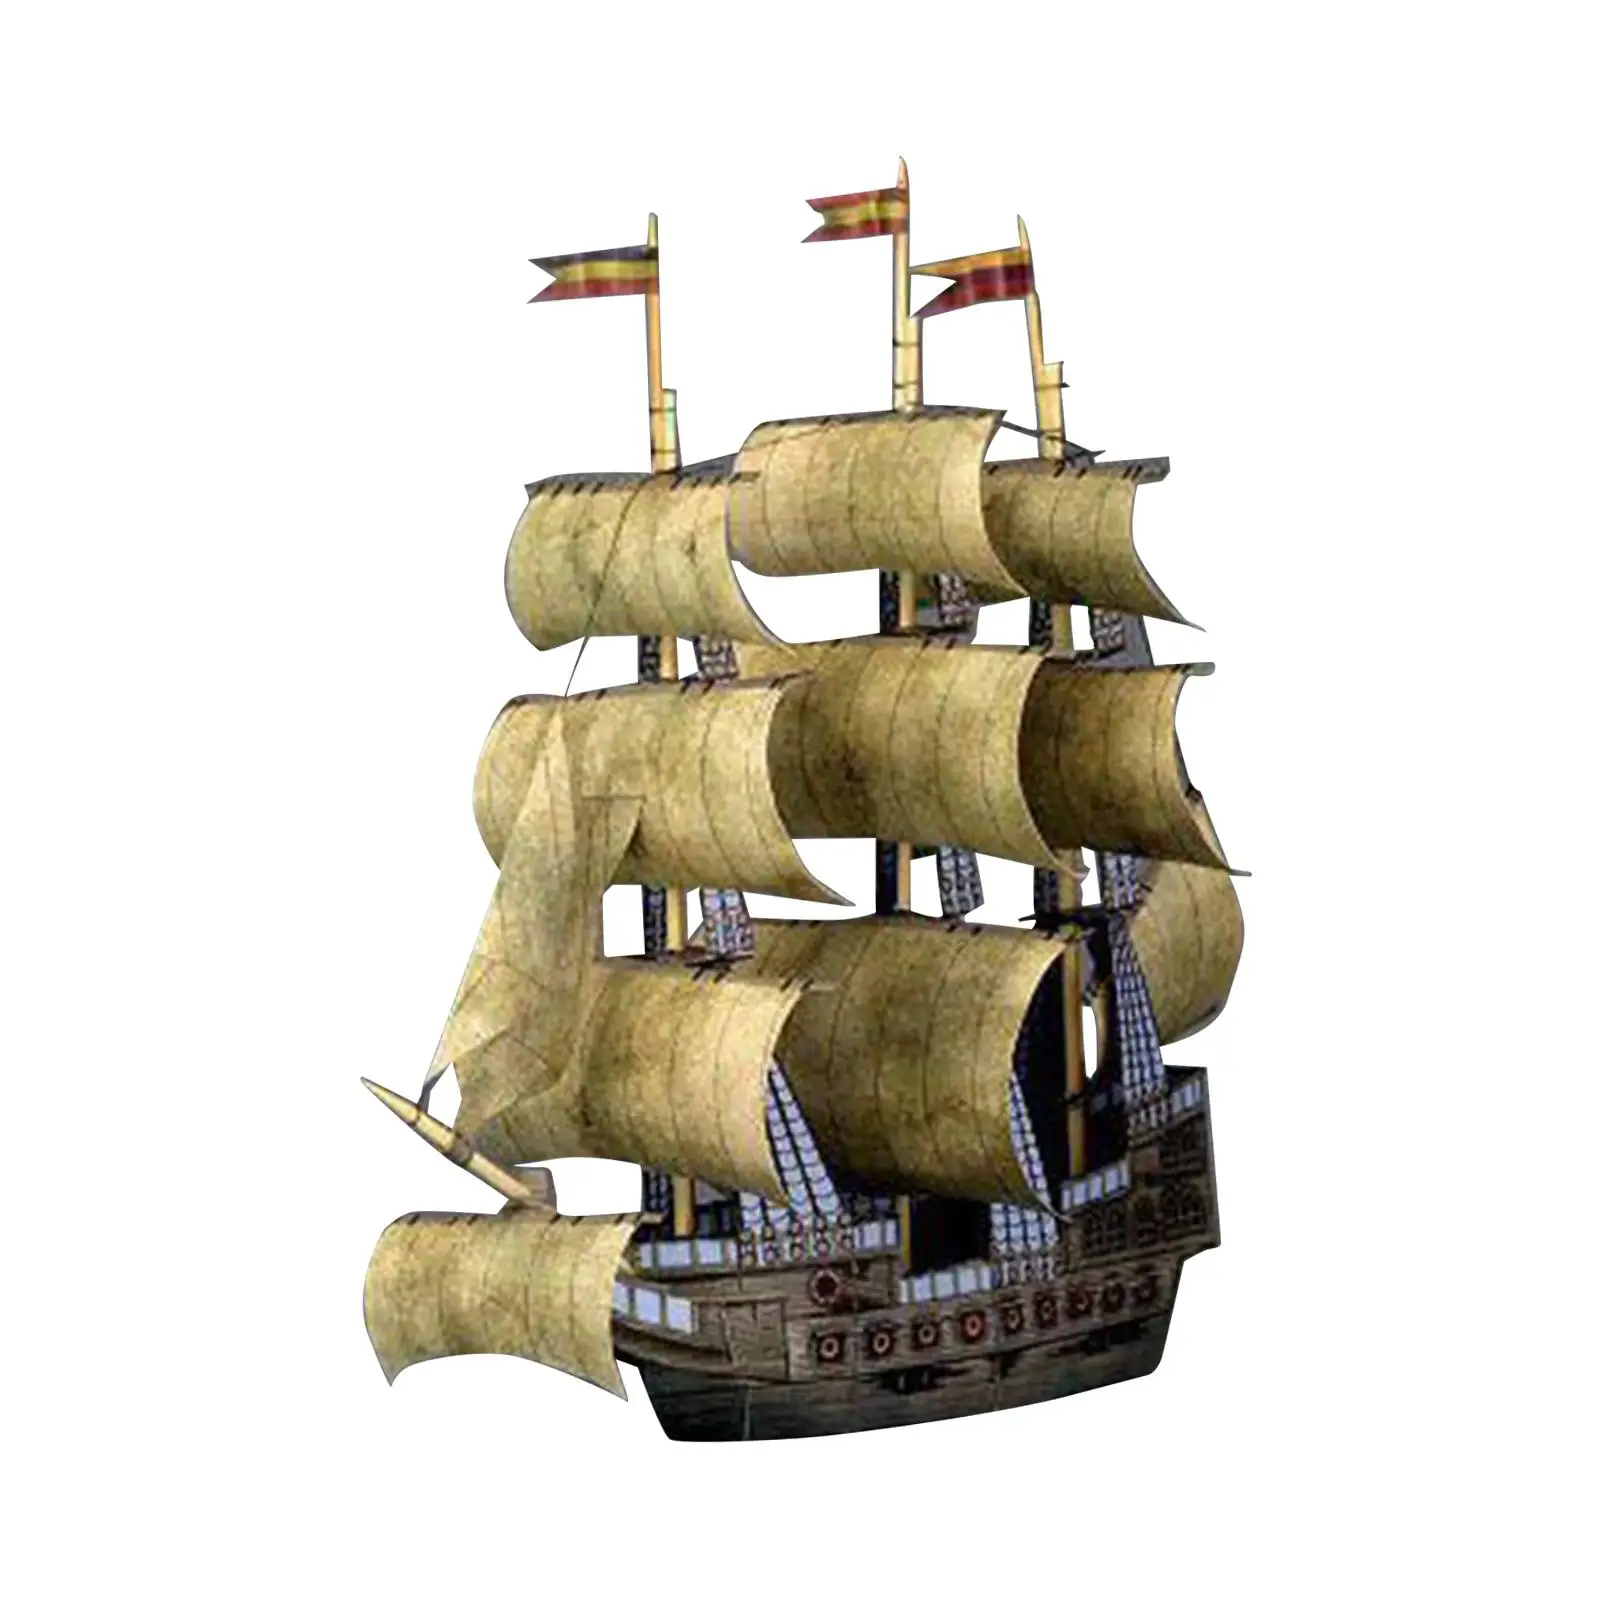 3D Paper Puzzle DIY Ship Craft Model Kits to Build for Adults 1:200 Scale